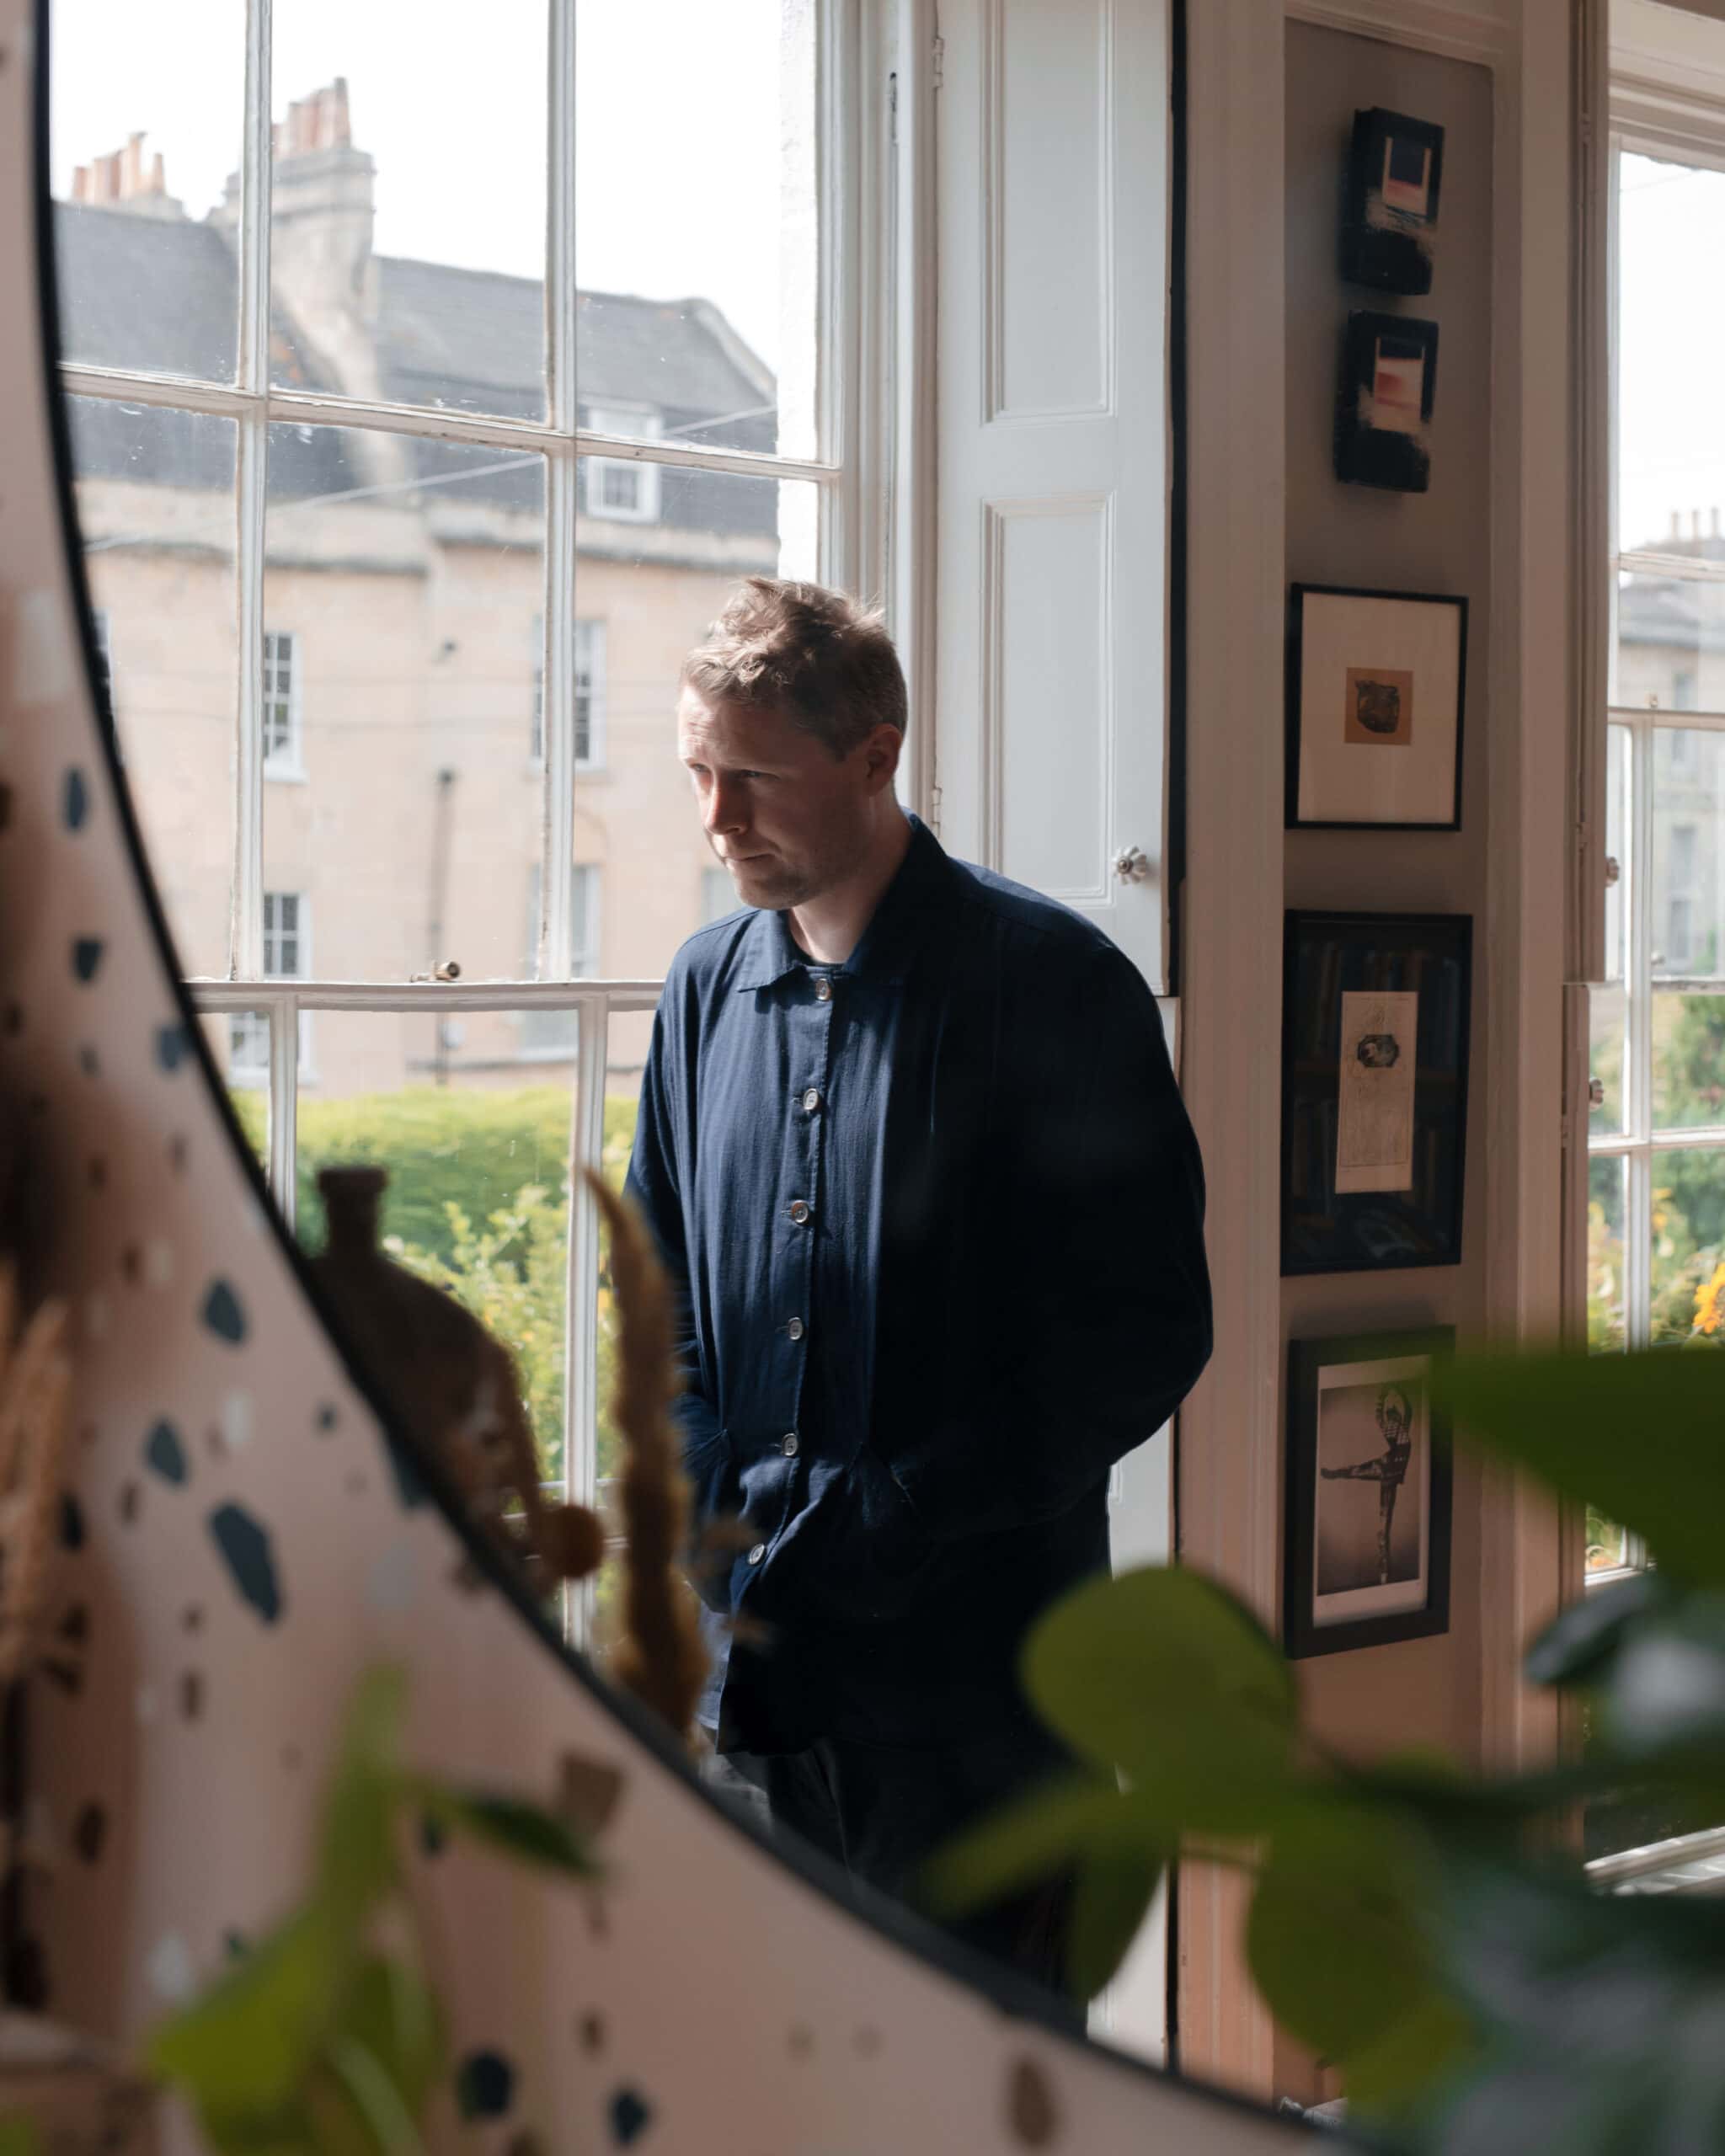 Author, Max Porter, photographed at his home in Bath, UK ahead of the publication of his third book, The Death of Francis Bacon. Previous books include Lanny and grief is the thing with feathers